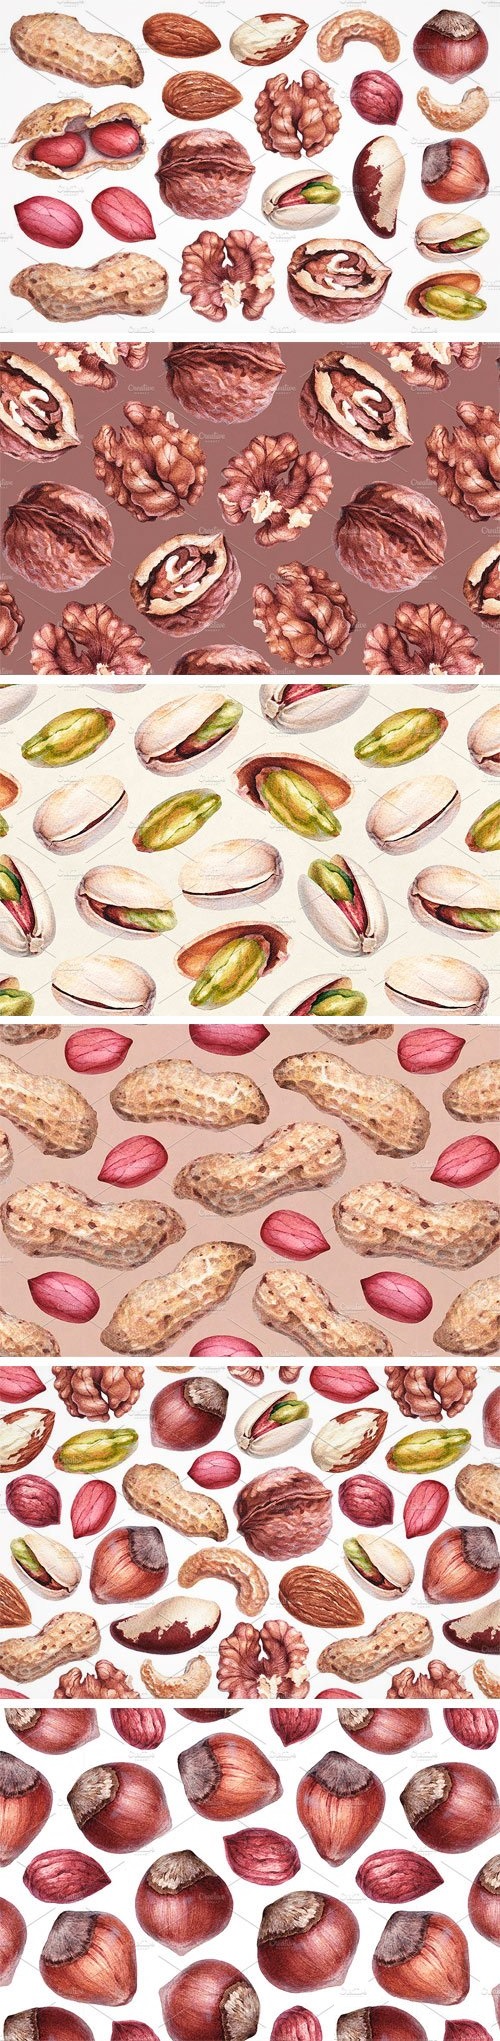 Watercolour Illustrations of Nuts - 1708642